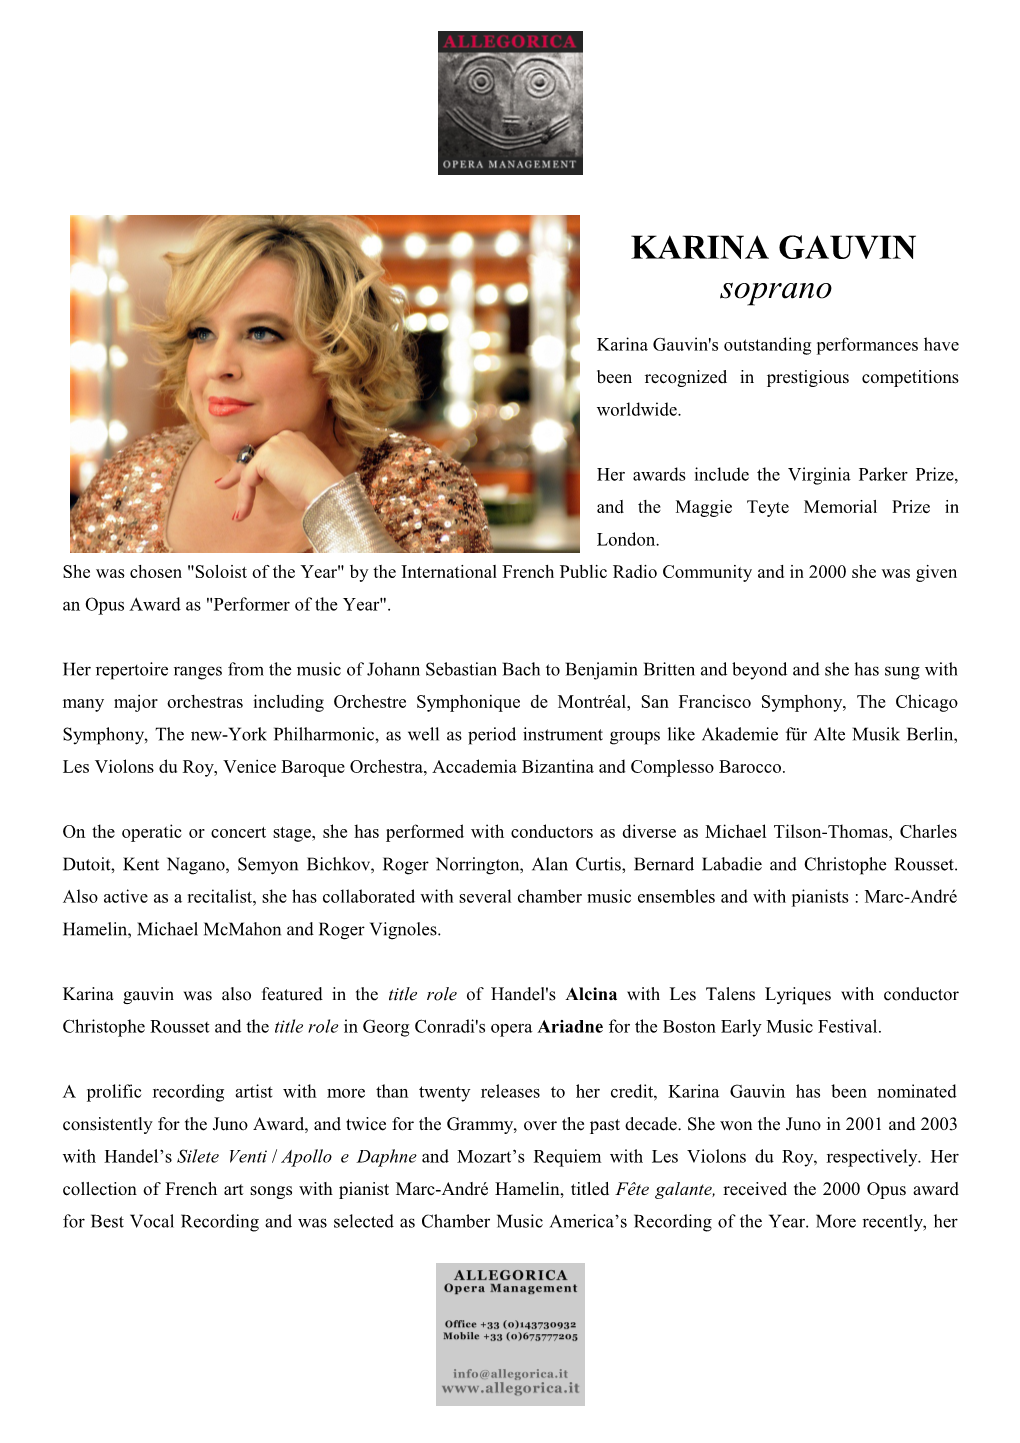 Karina Gauvin's Outstanding Performances Have Been Recognized in Prestigious Competitions